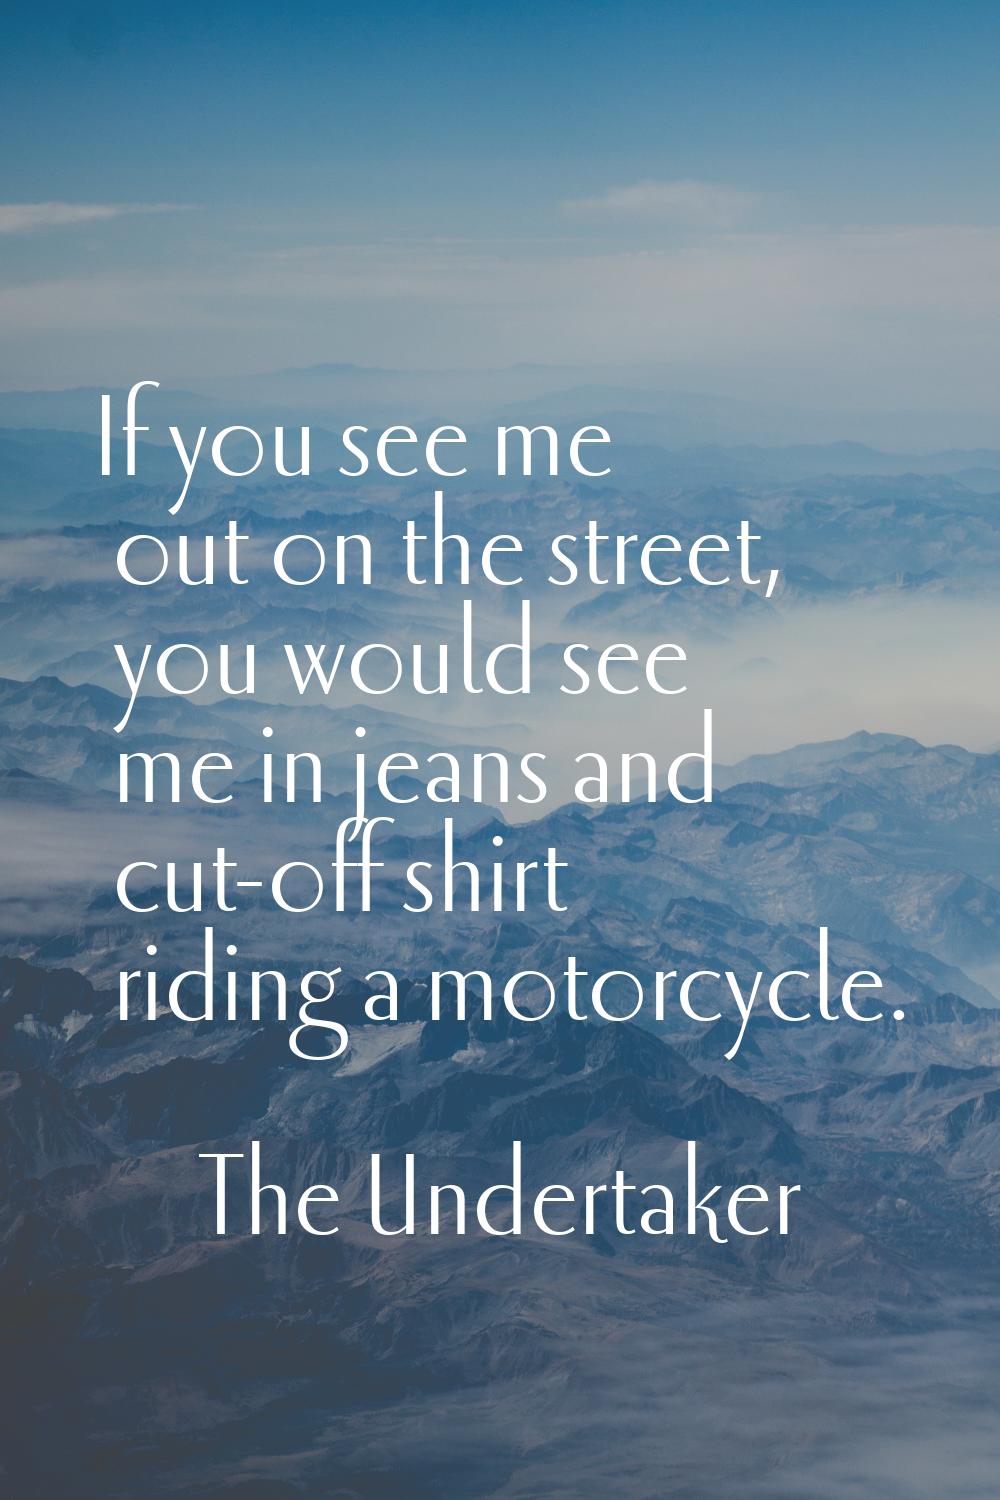 If you see me out on the street, you would see me in jeans and cut-off shirt riding a motorcycle.